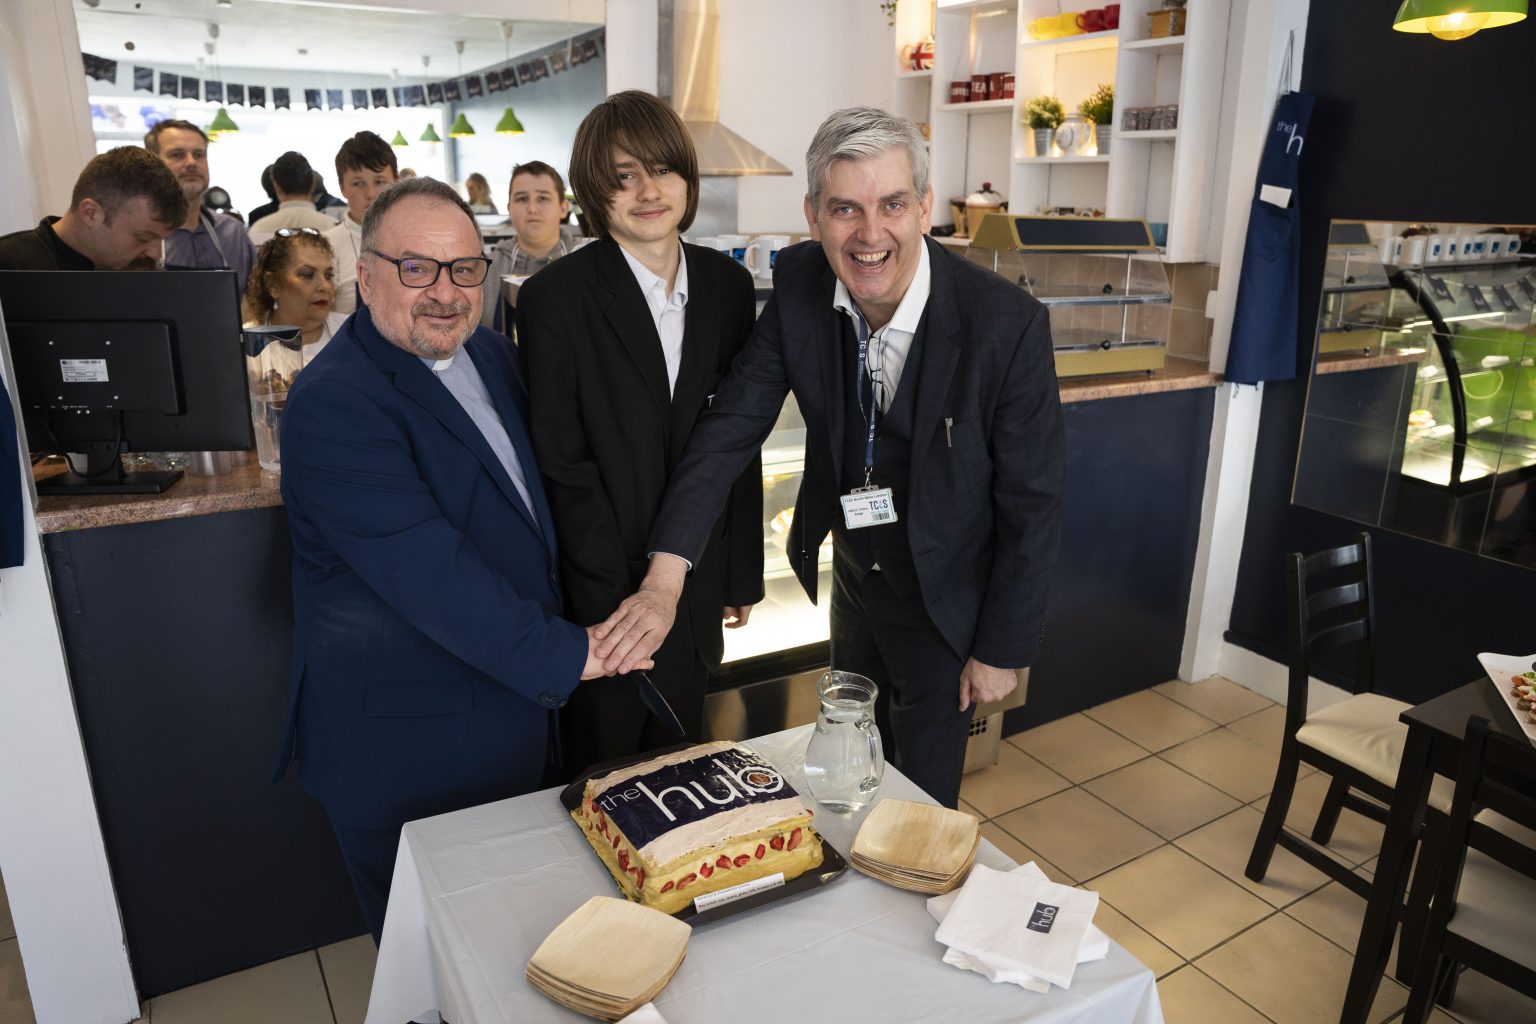 Two men and a teenager standing in front of a cake in a cafe